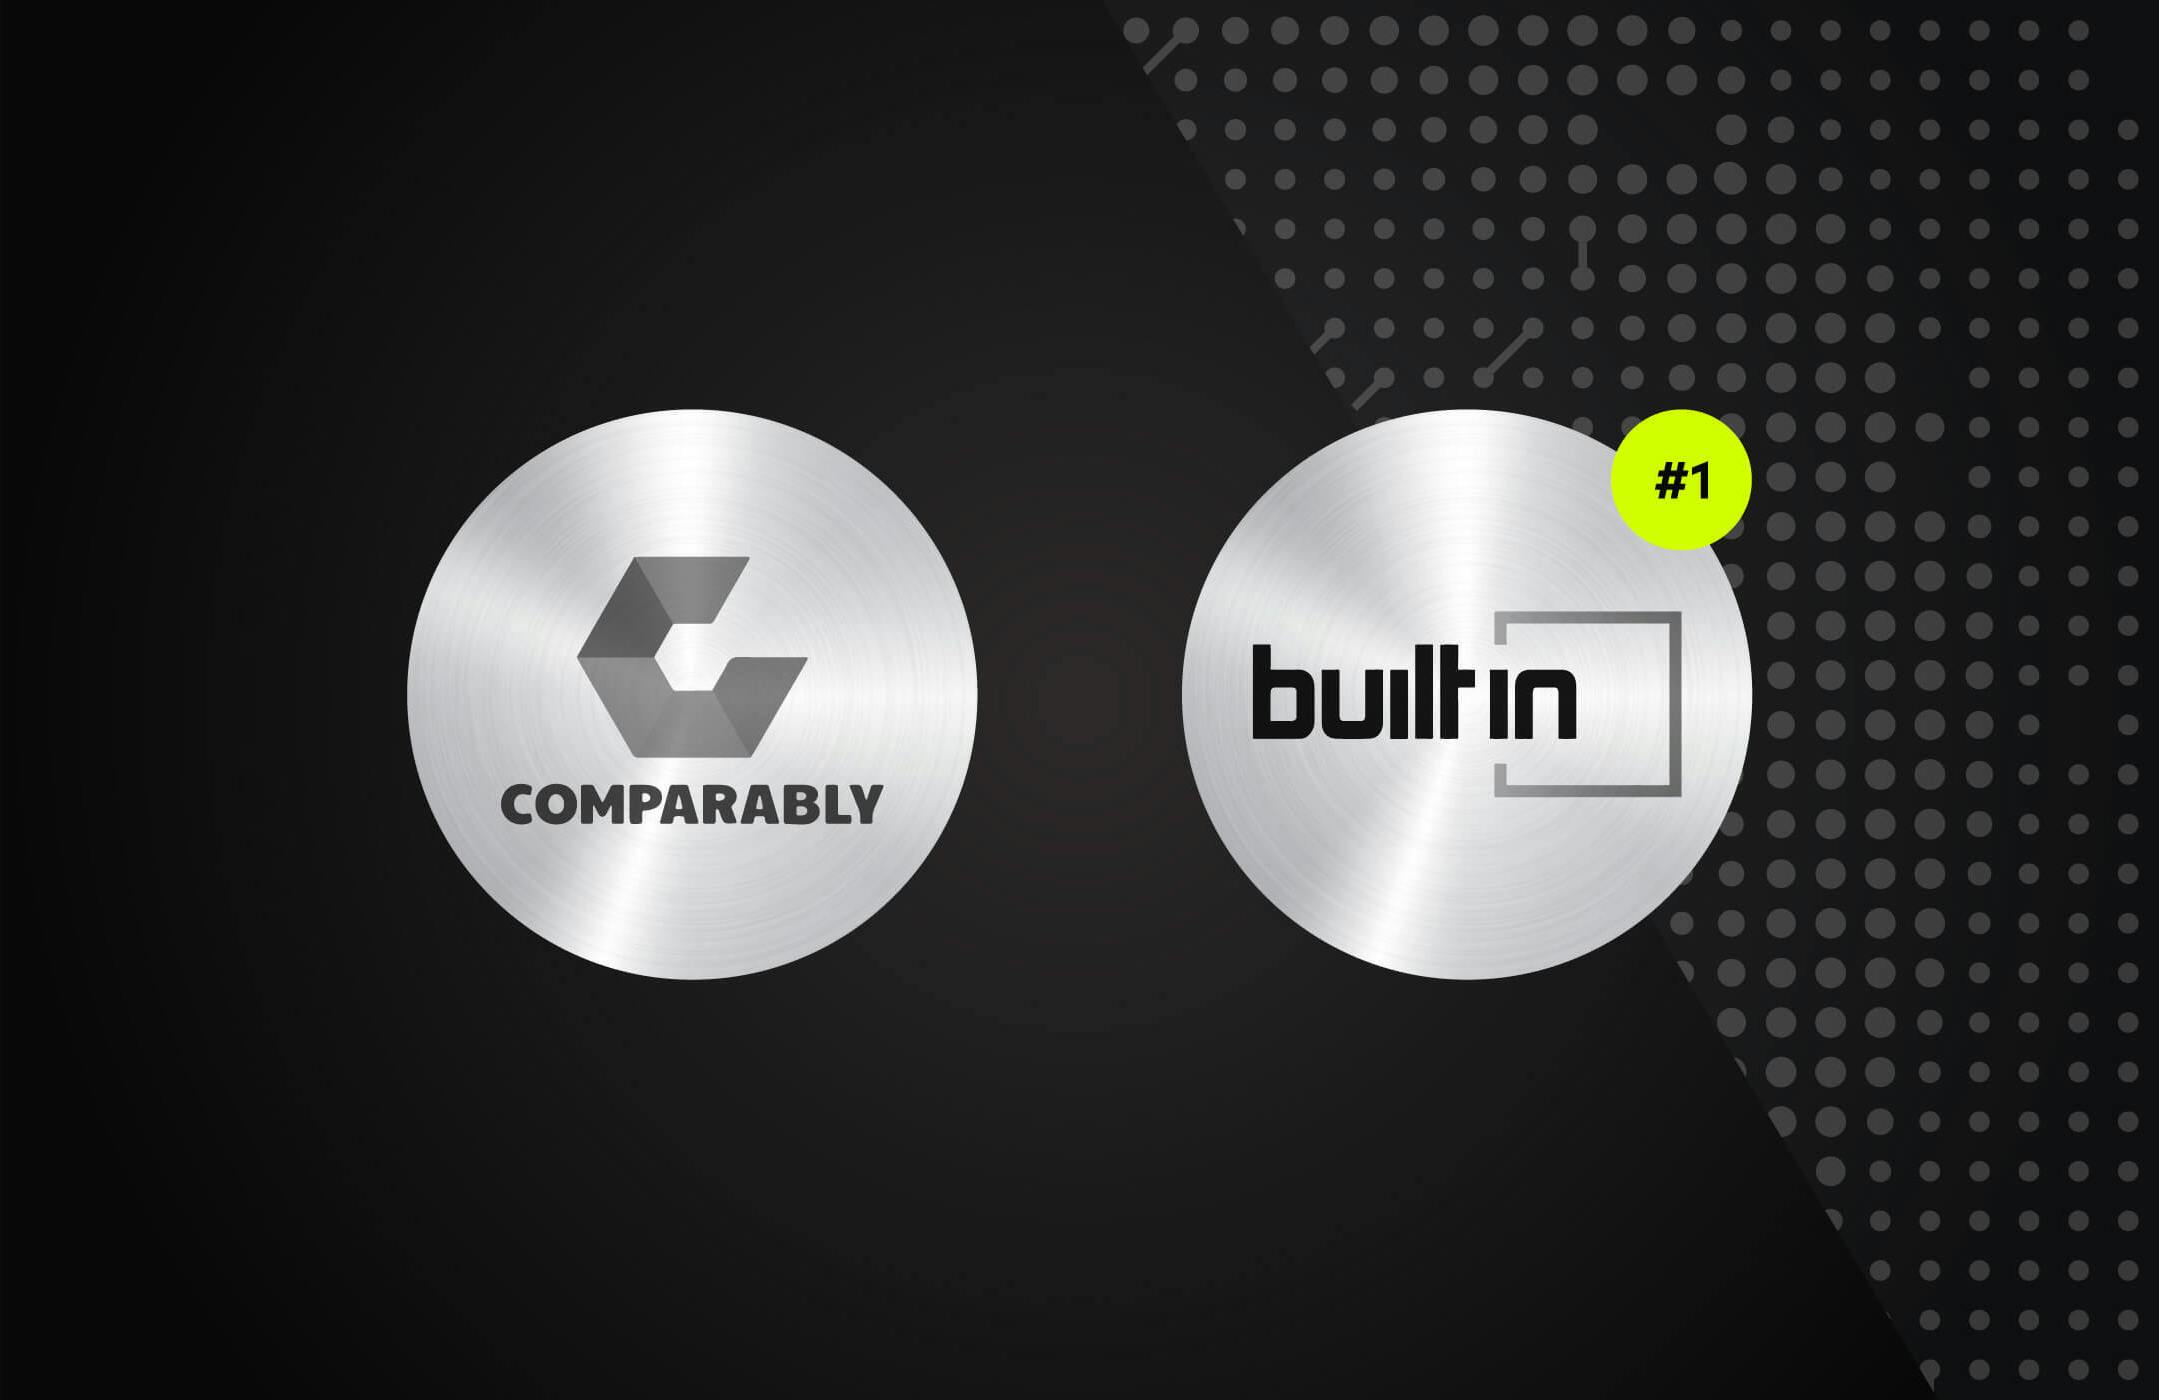 Comparably and BuiltInSeattle #1 Awards